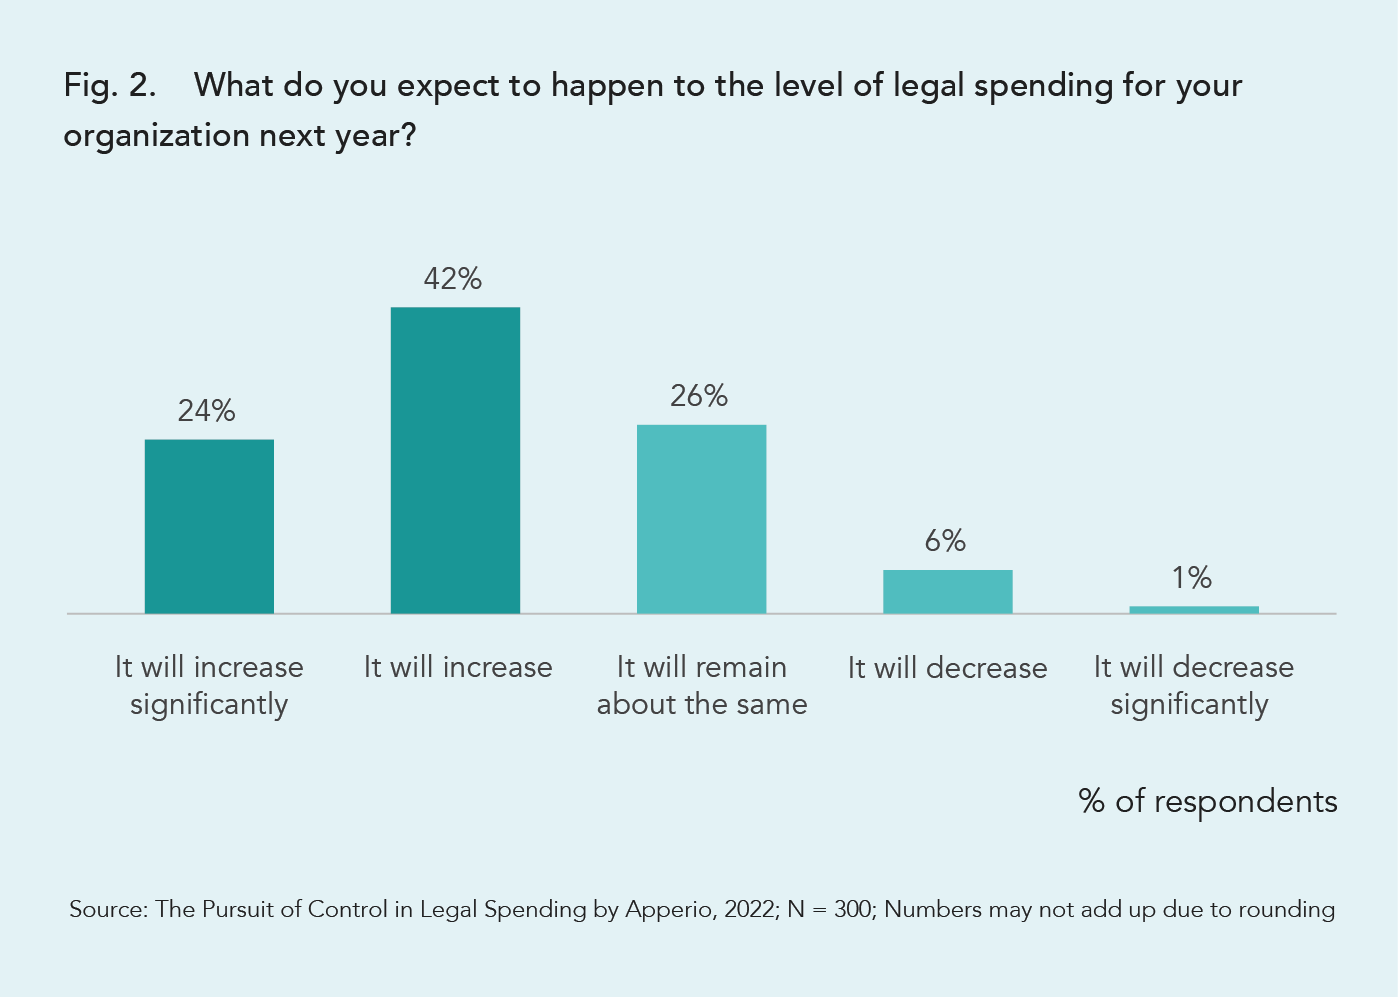 66% of in-house lawyers working for PE or VC firms expect spending levels to rise again next year.